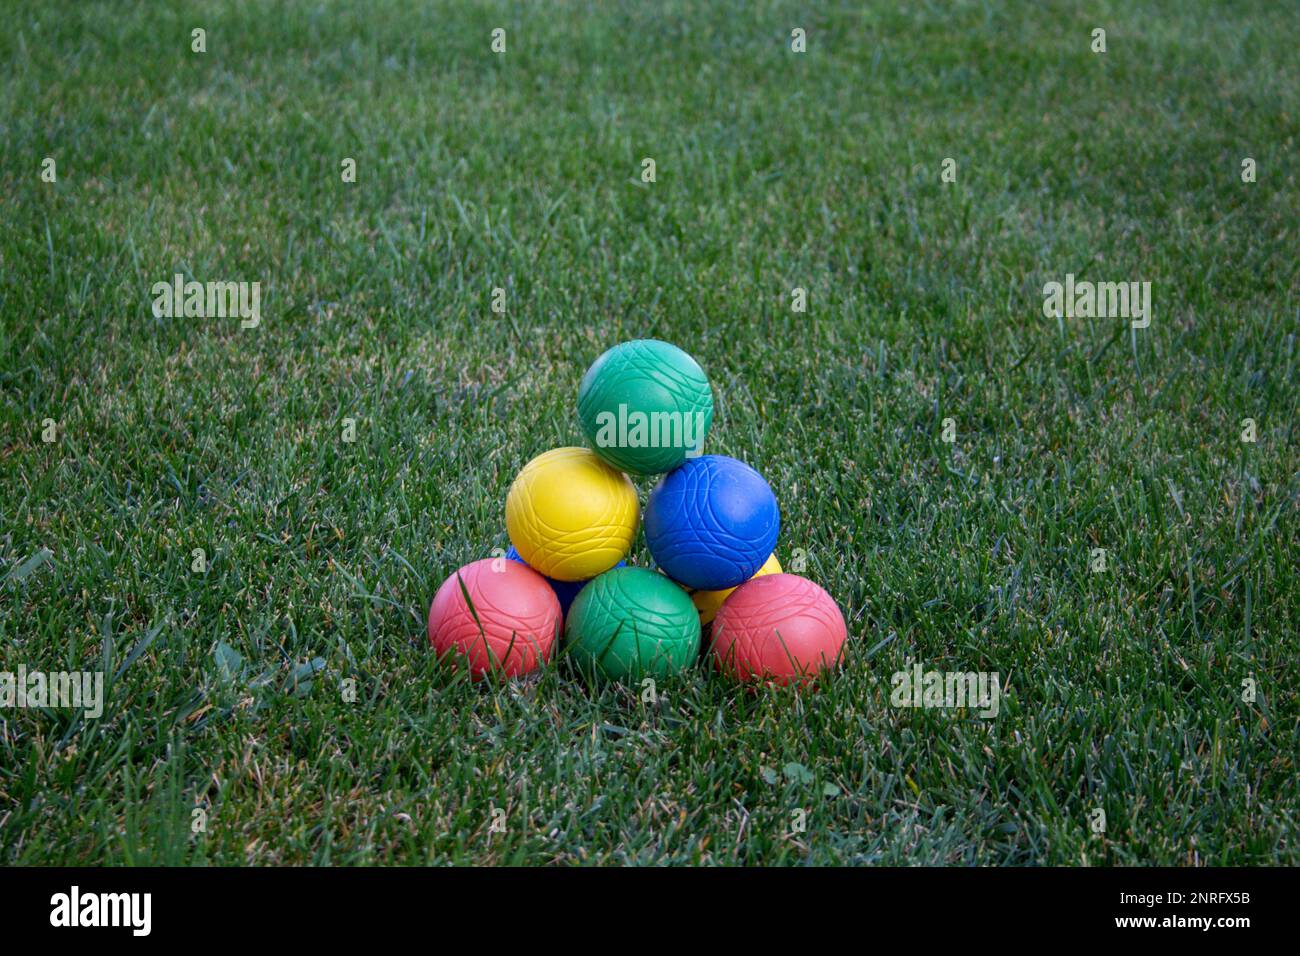 Image of a pyramid of colored bowls in a green meadow. Stock Photo